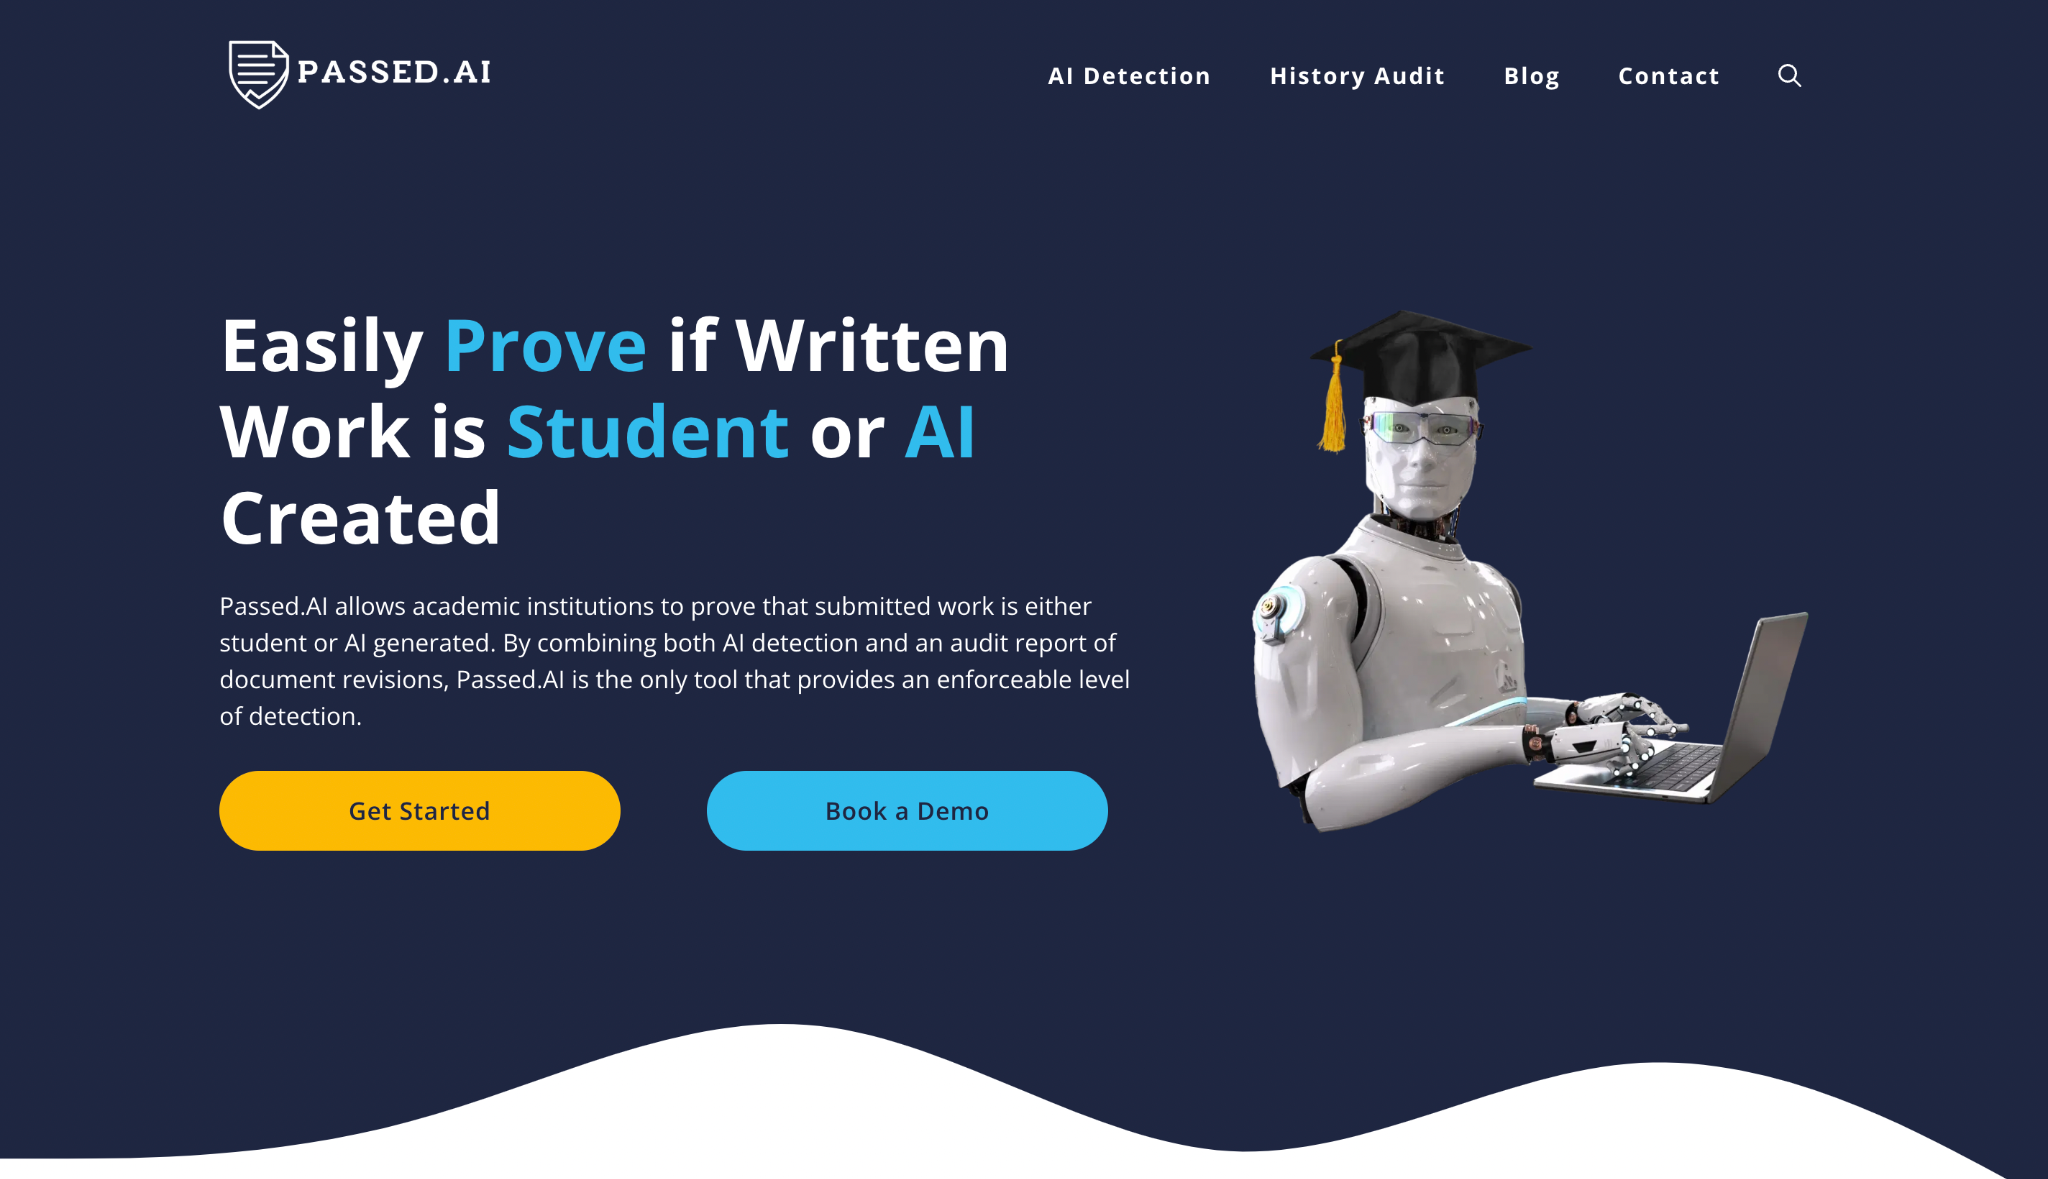 Passed.AI Website Banner